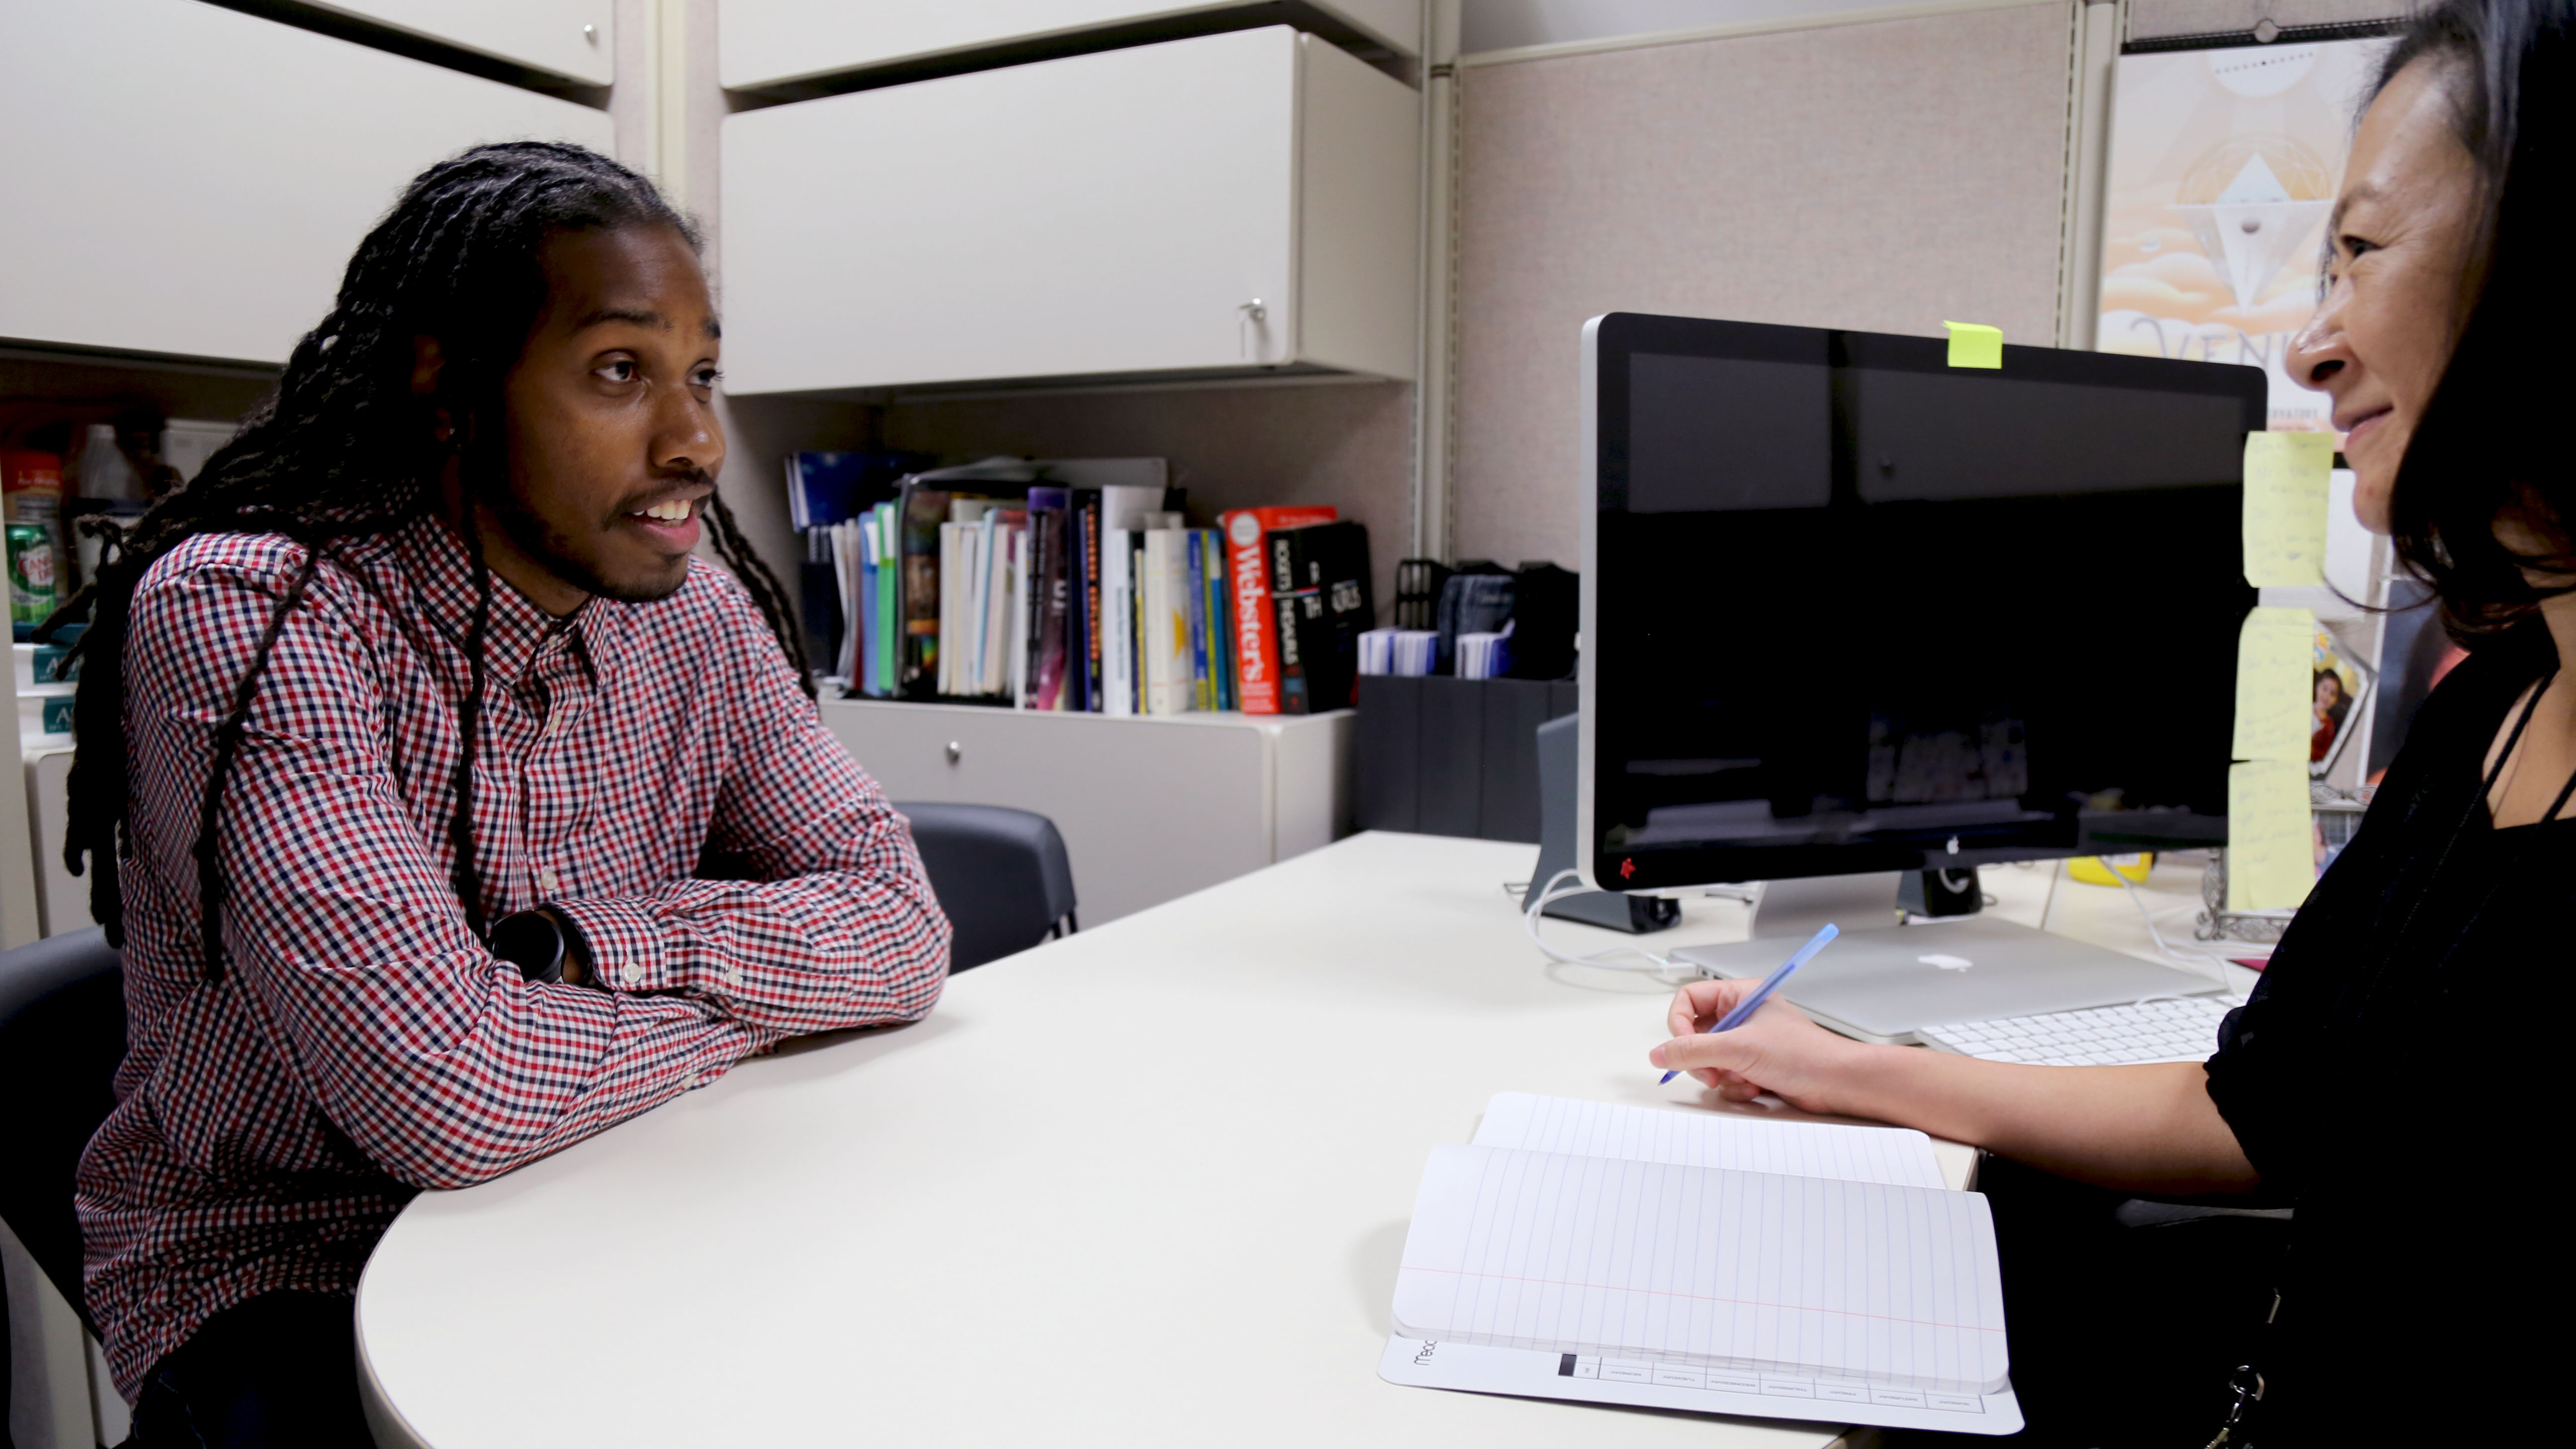 A new employee sits across from a program coordinator in an office setting.